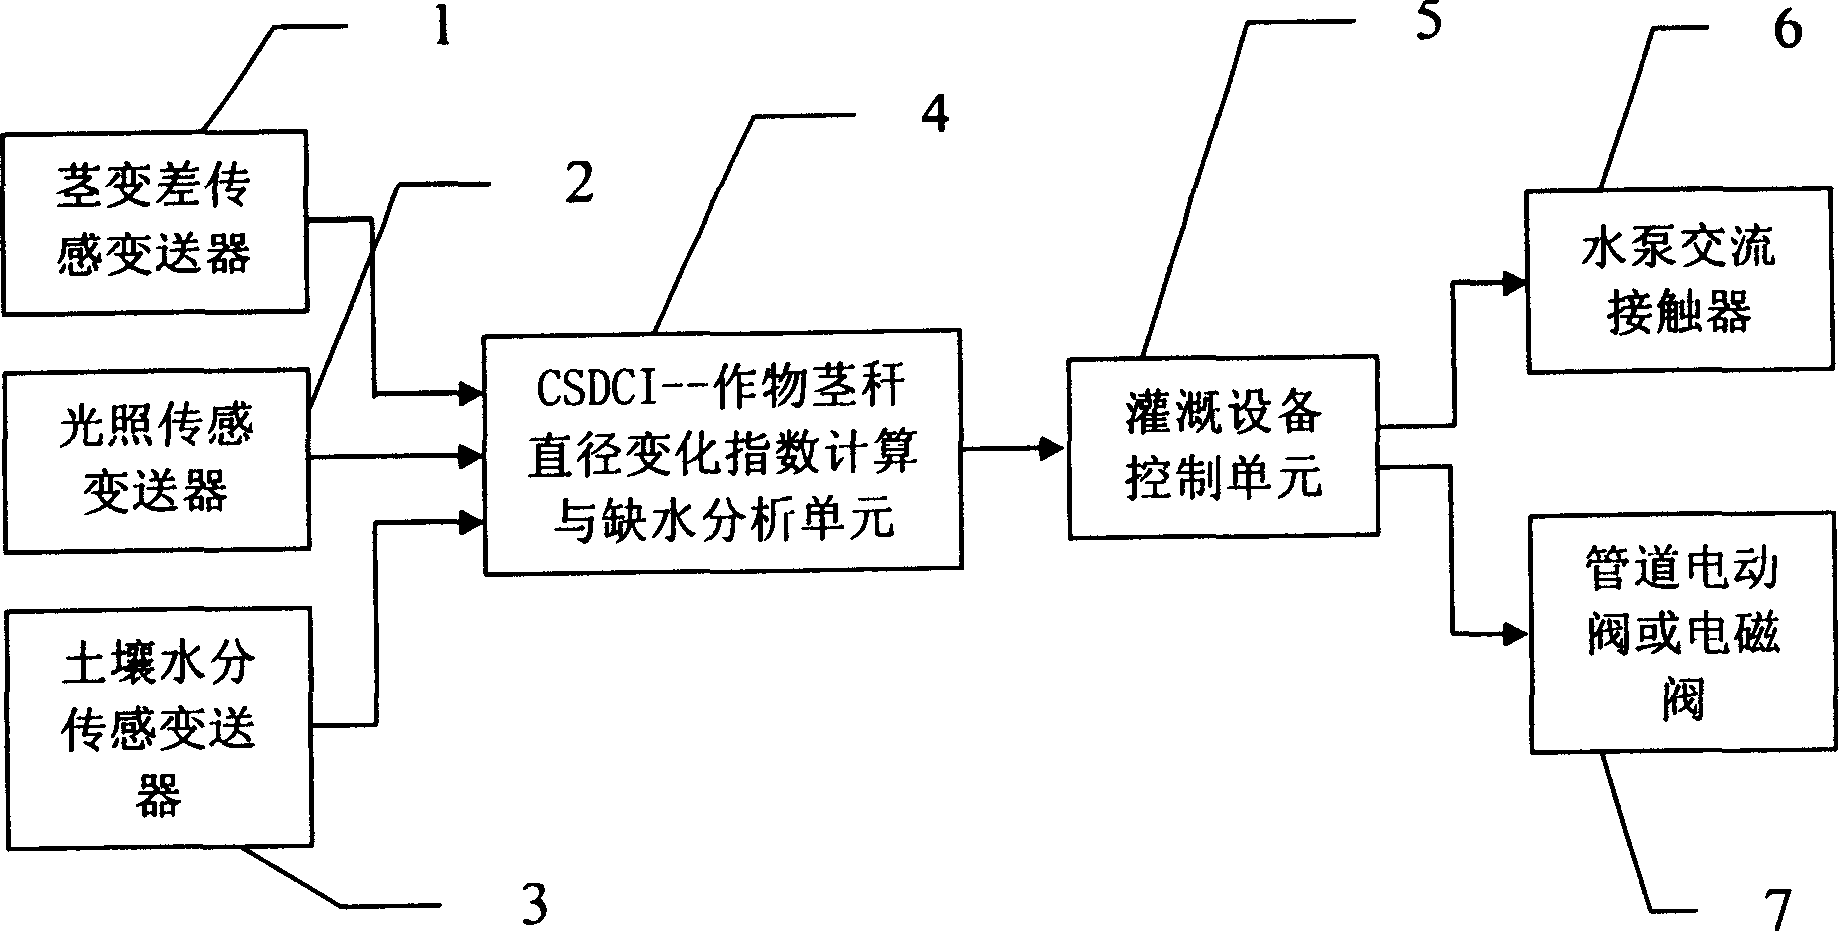 Irrigation control method and device according to crop water deficiency stress physiological reaction